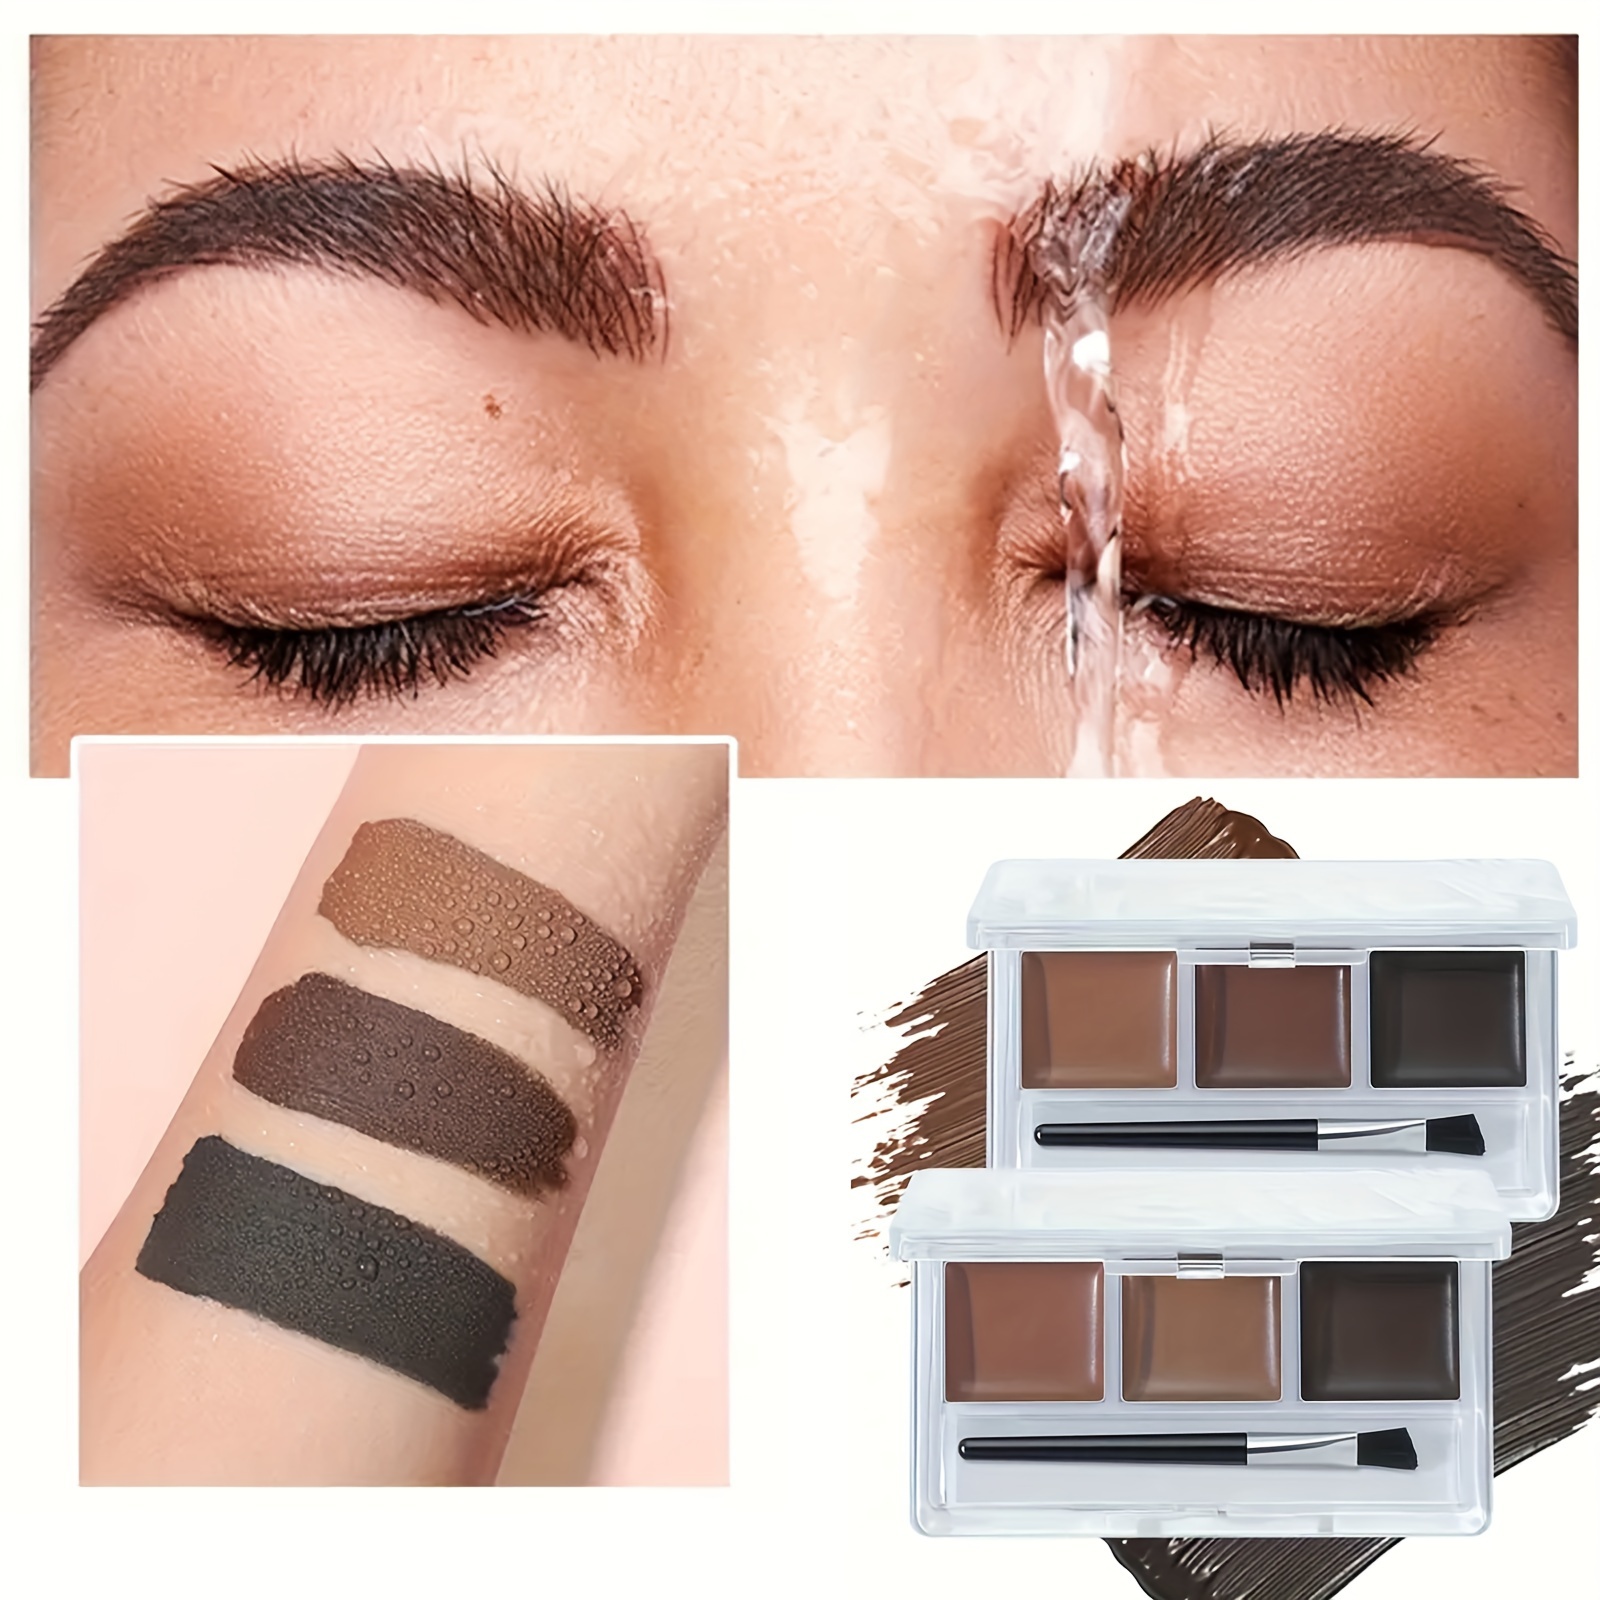 

3-color Eyebrow Pomade, Long-lasting Waterproof Brow Cream, Smudge-proof & Sweat-resistant, Natural Brow Makeup For All Skin Tones Contain Plant Squalane